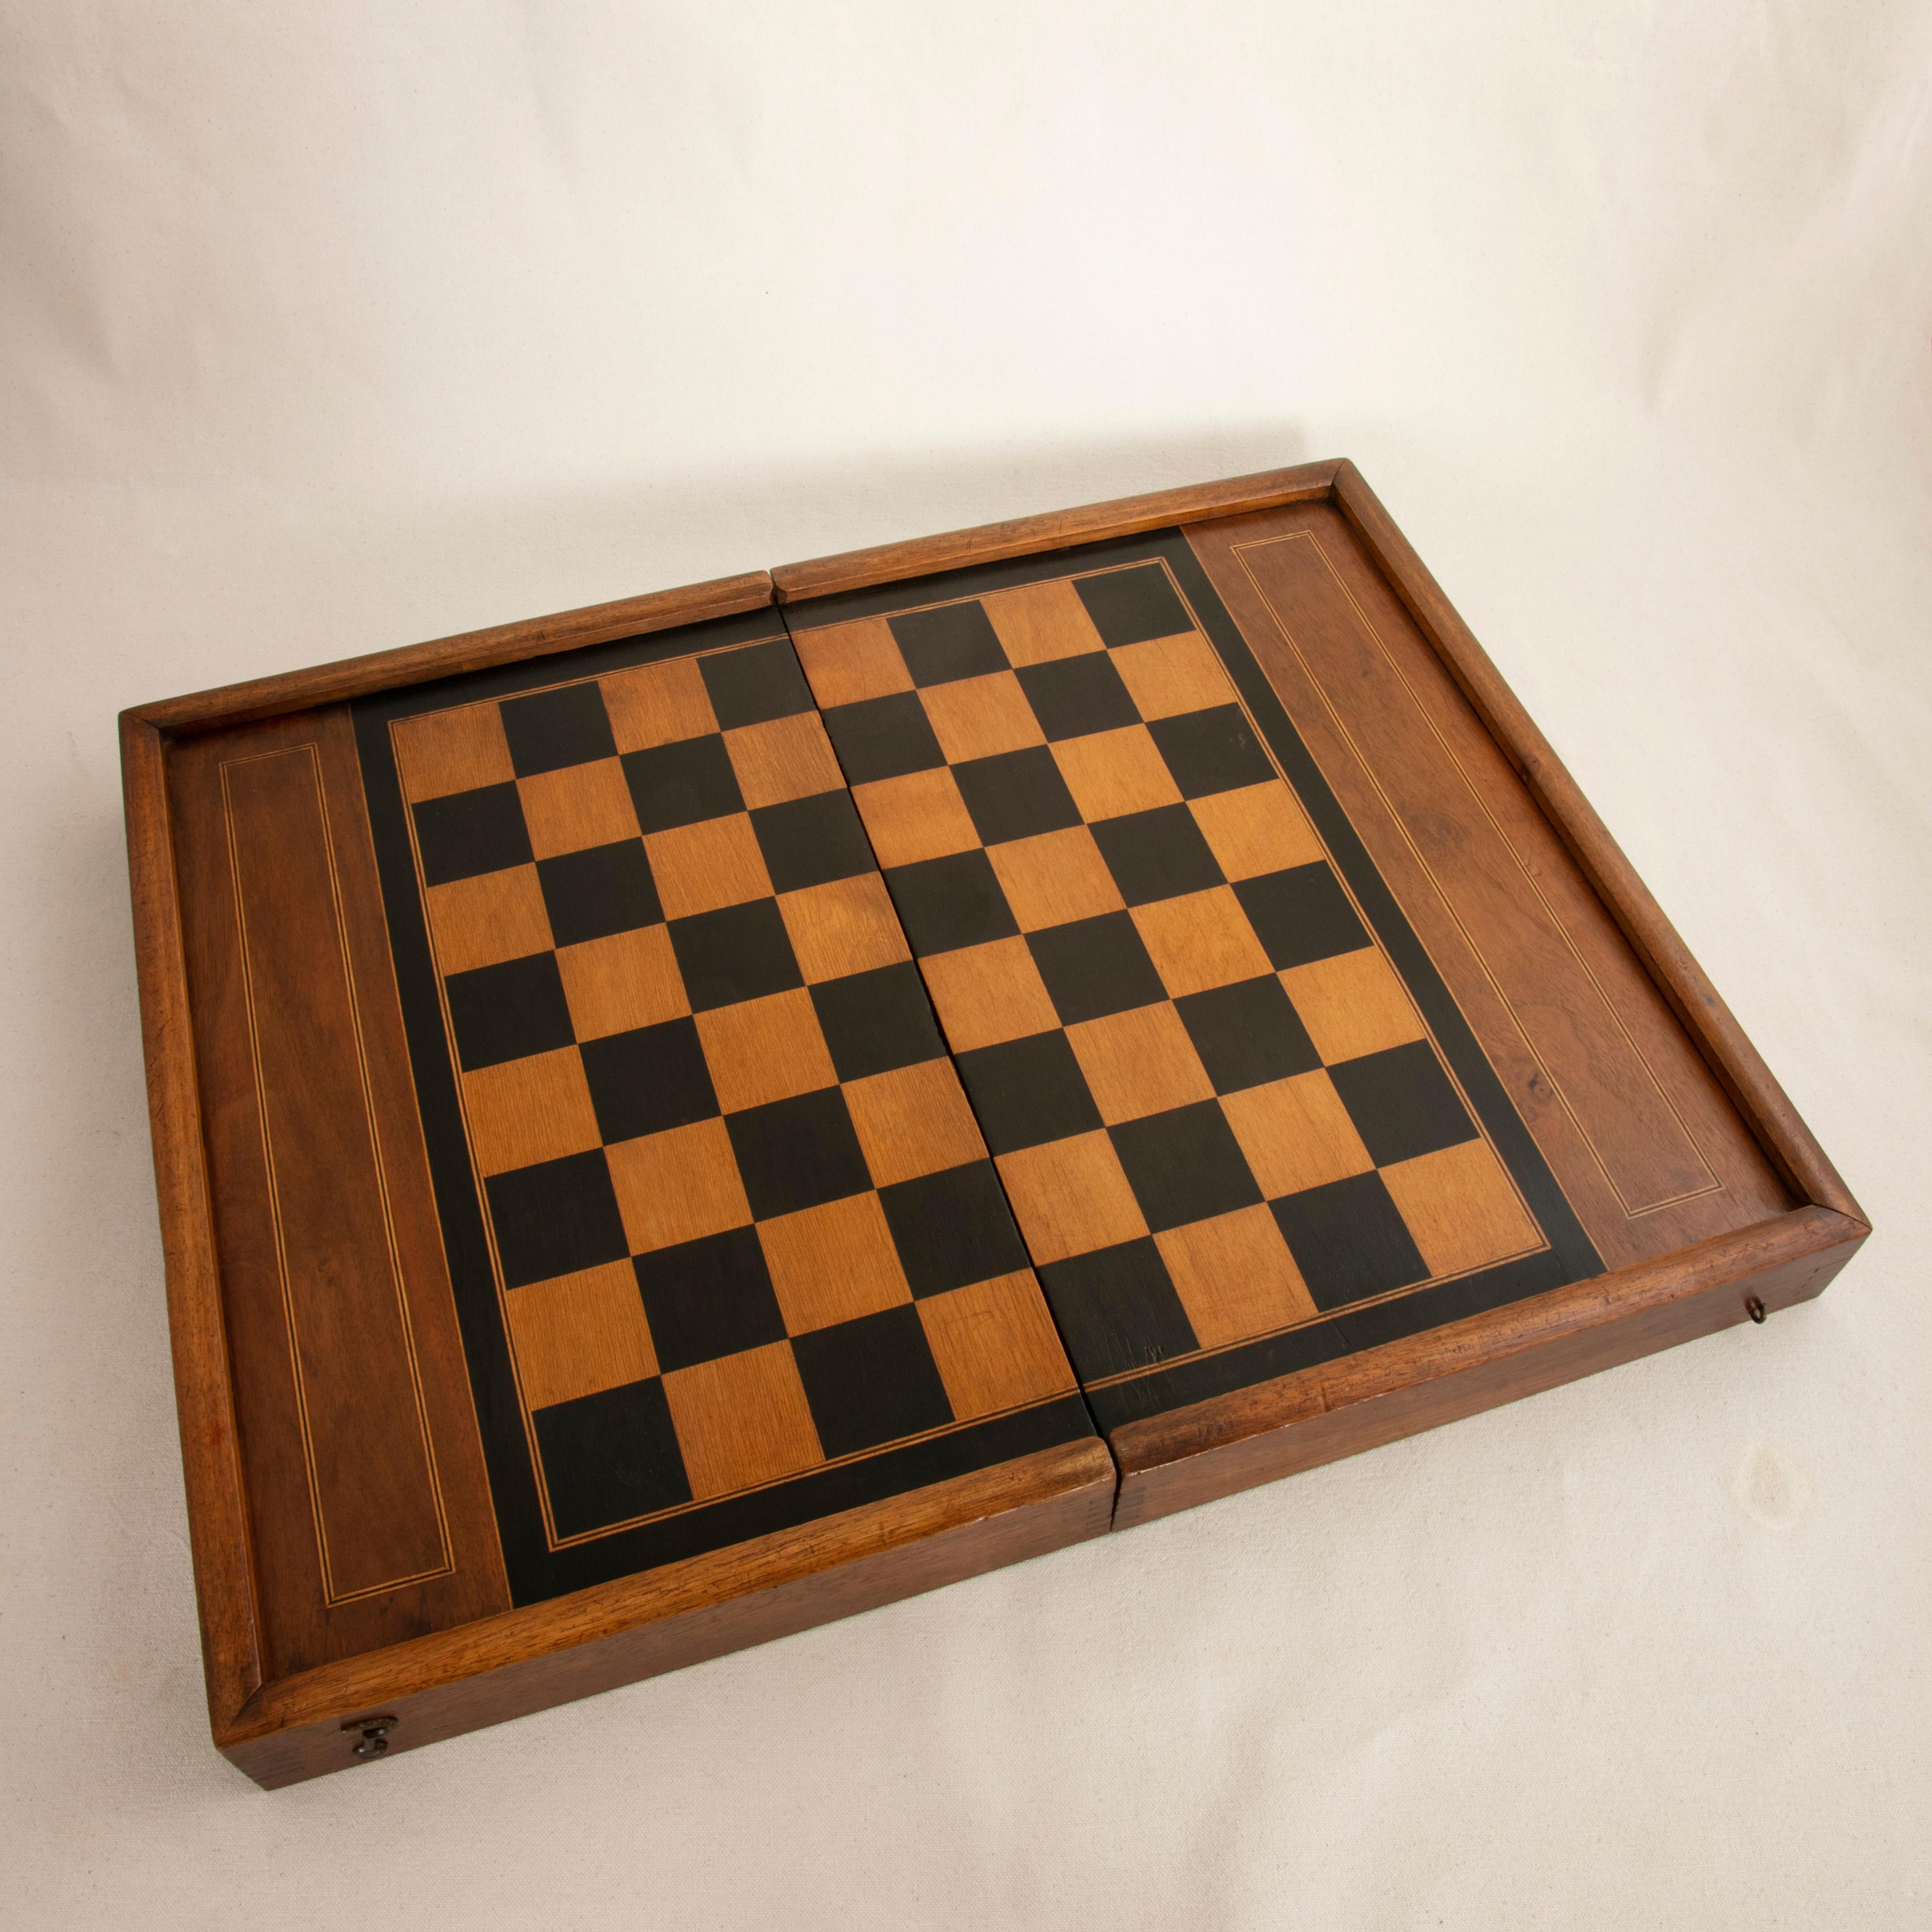 Early 20th Century Walnut Marquetry Folding Game Box, with Chess, Checkers, Backgammon, circa 1900